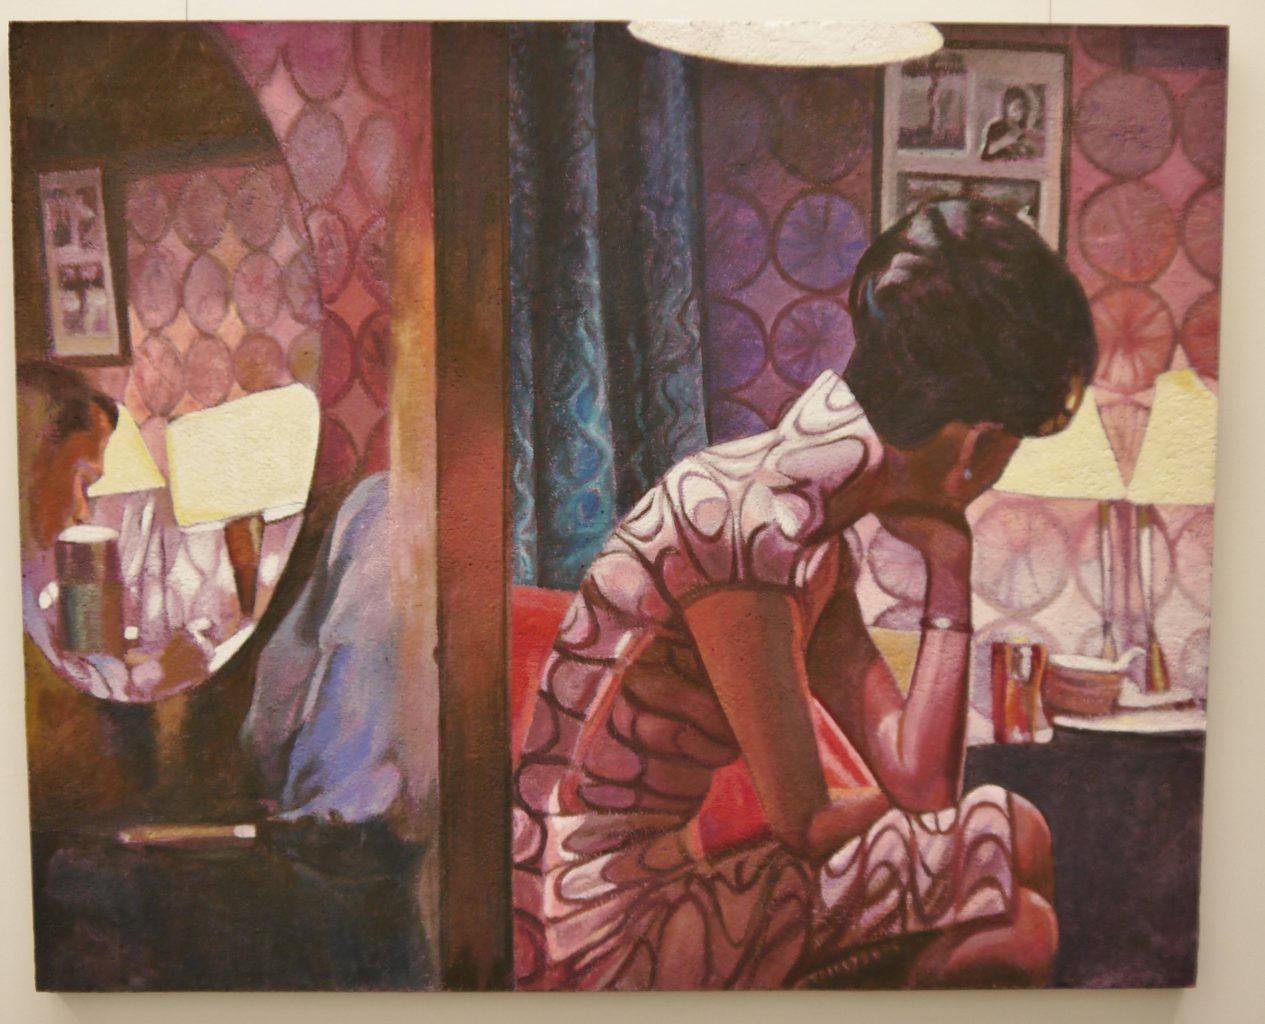 Claude Gazier, In the Mood for love, 2012